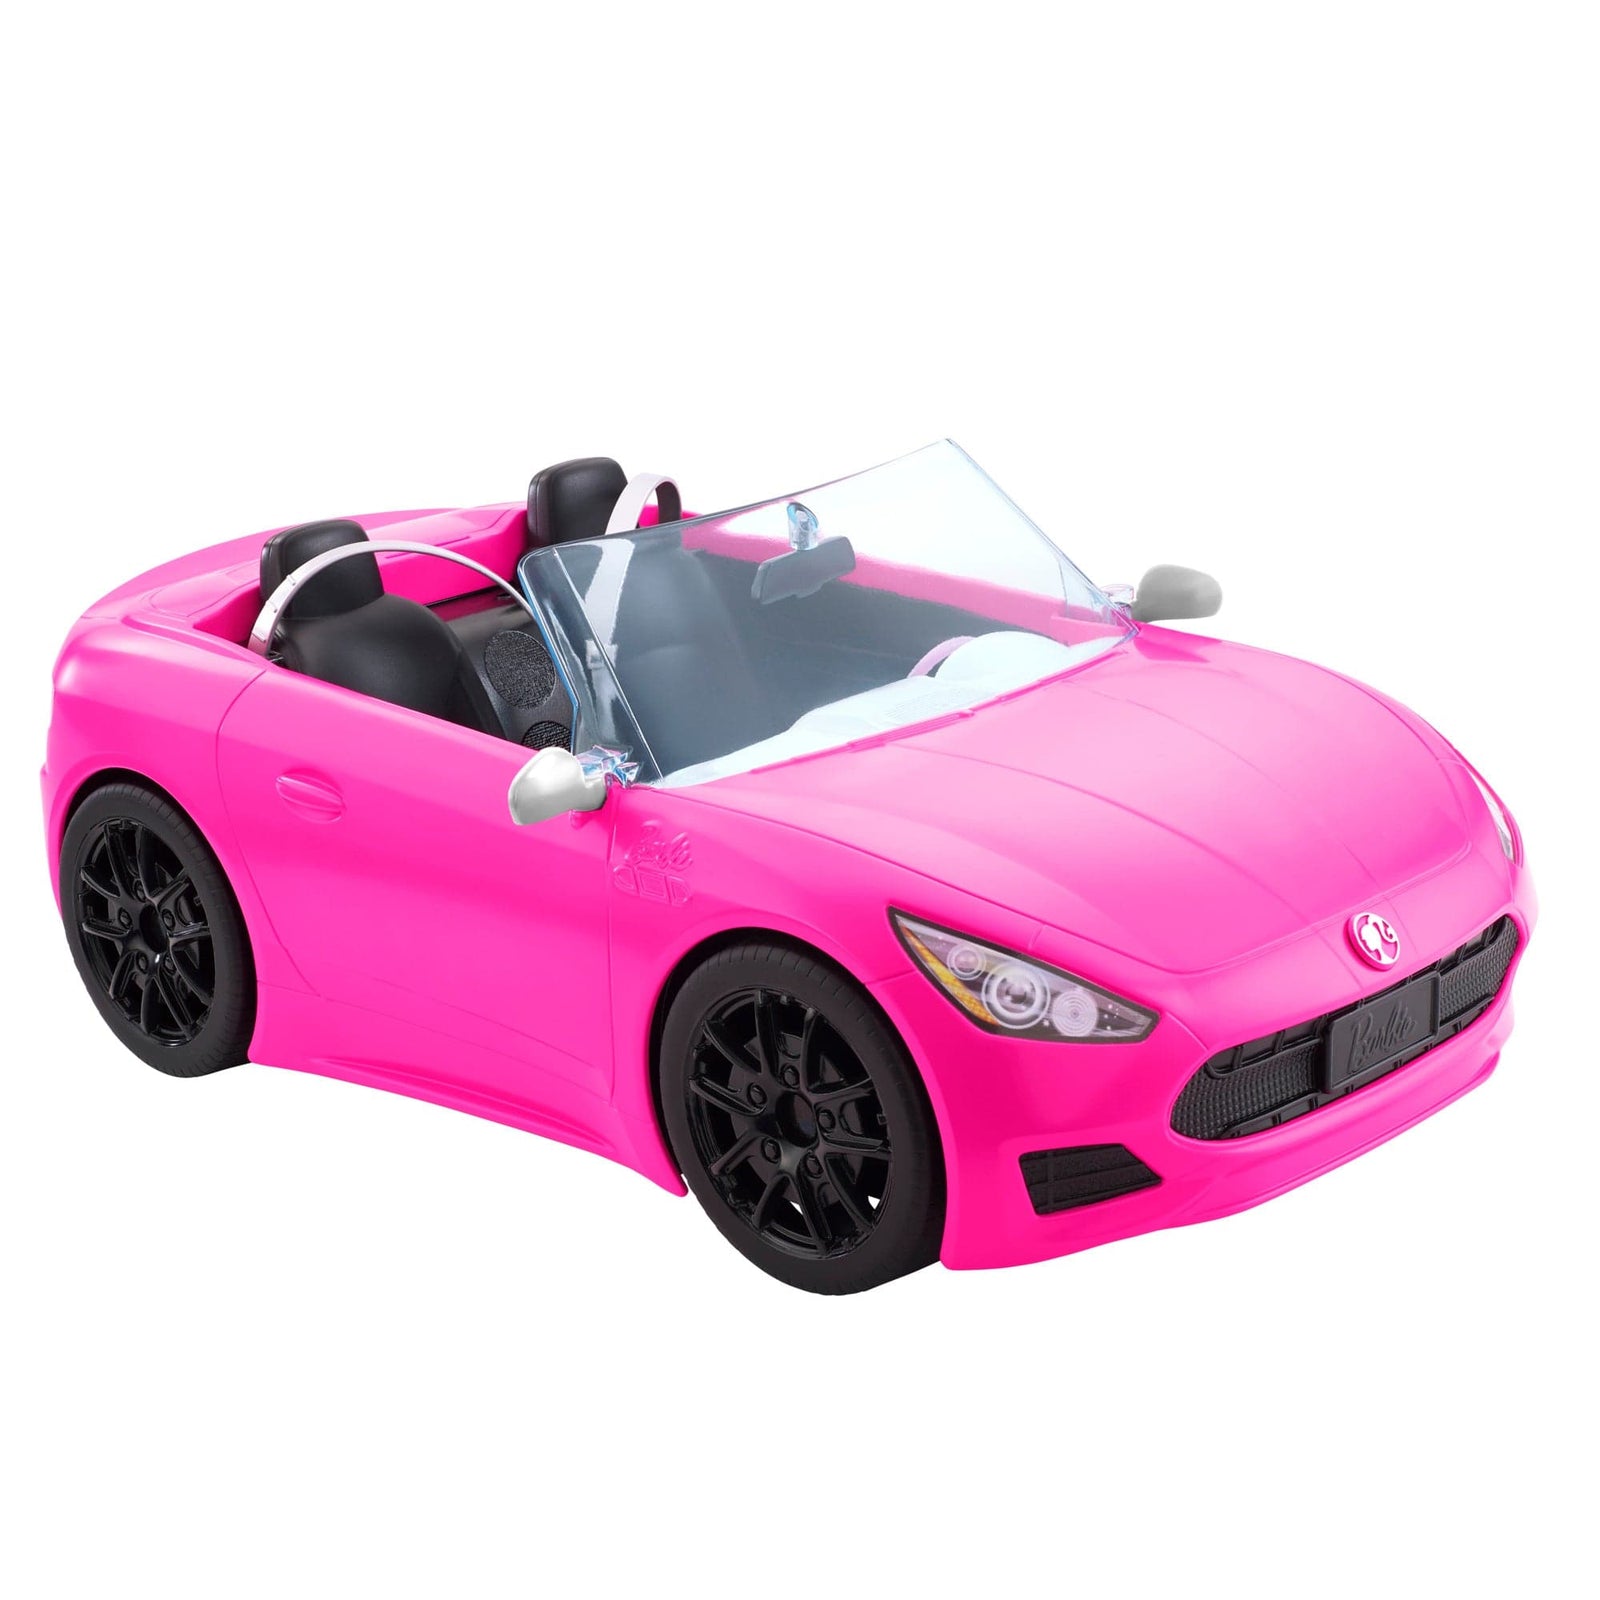 Barbie Pink Convertible Vehicle Toy with Rolling Wheels